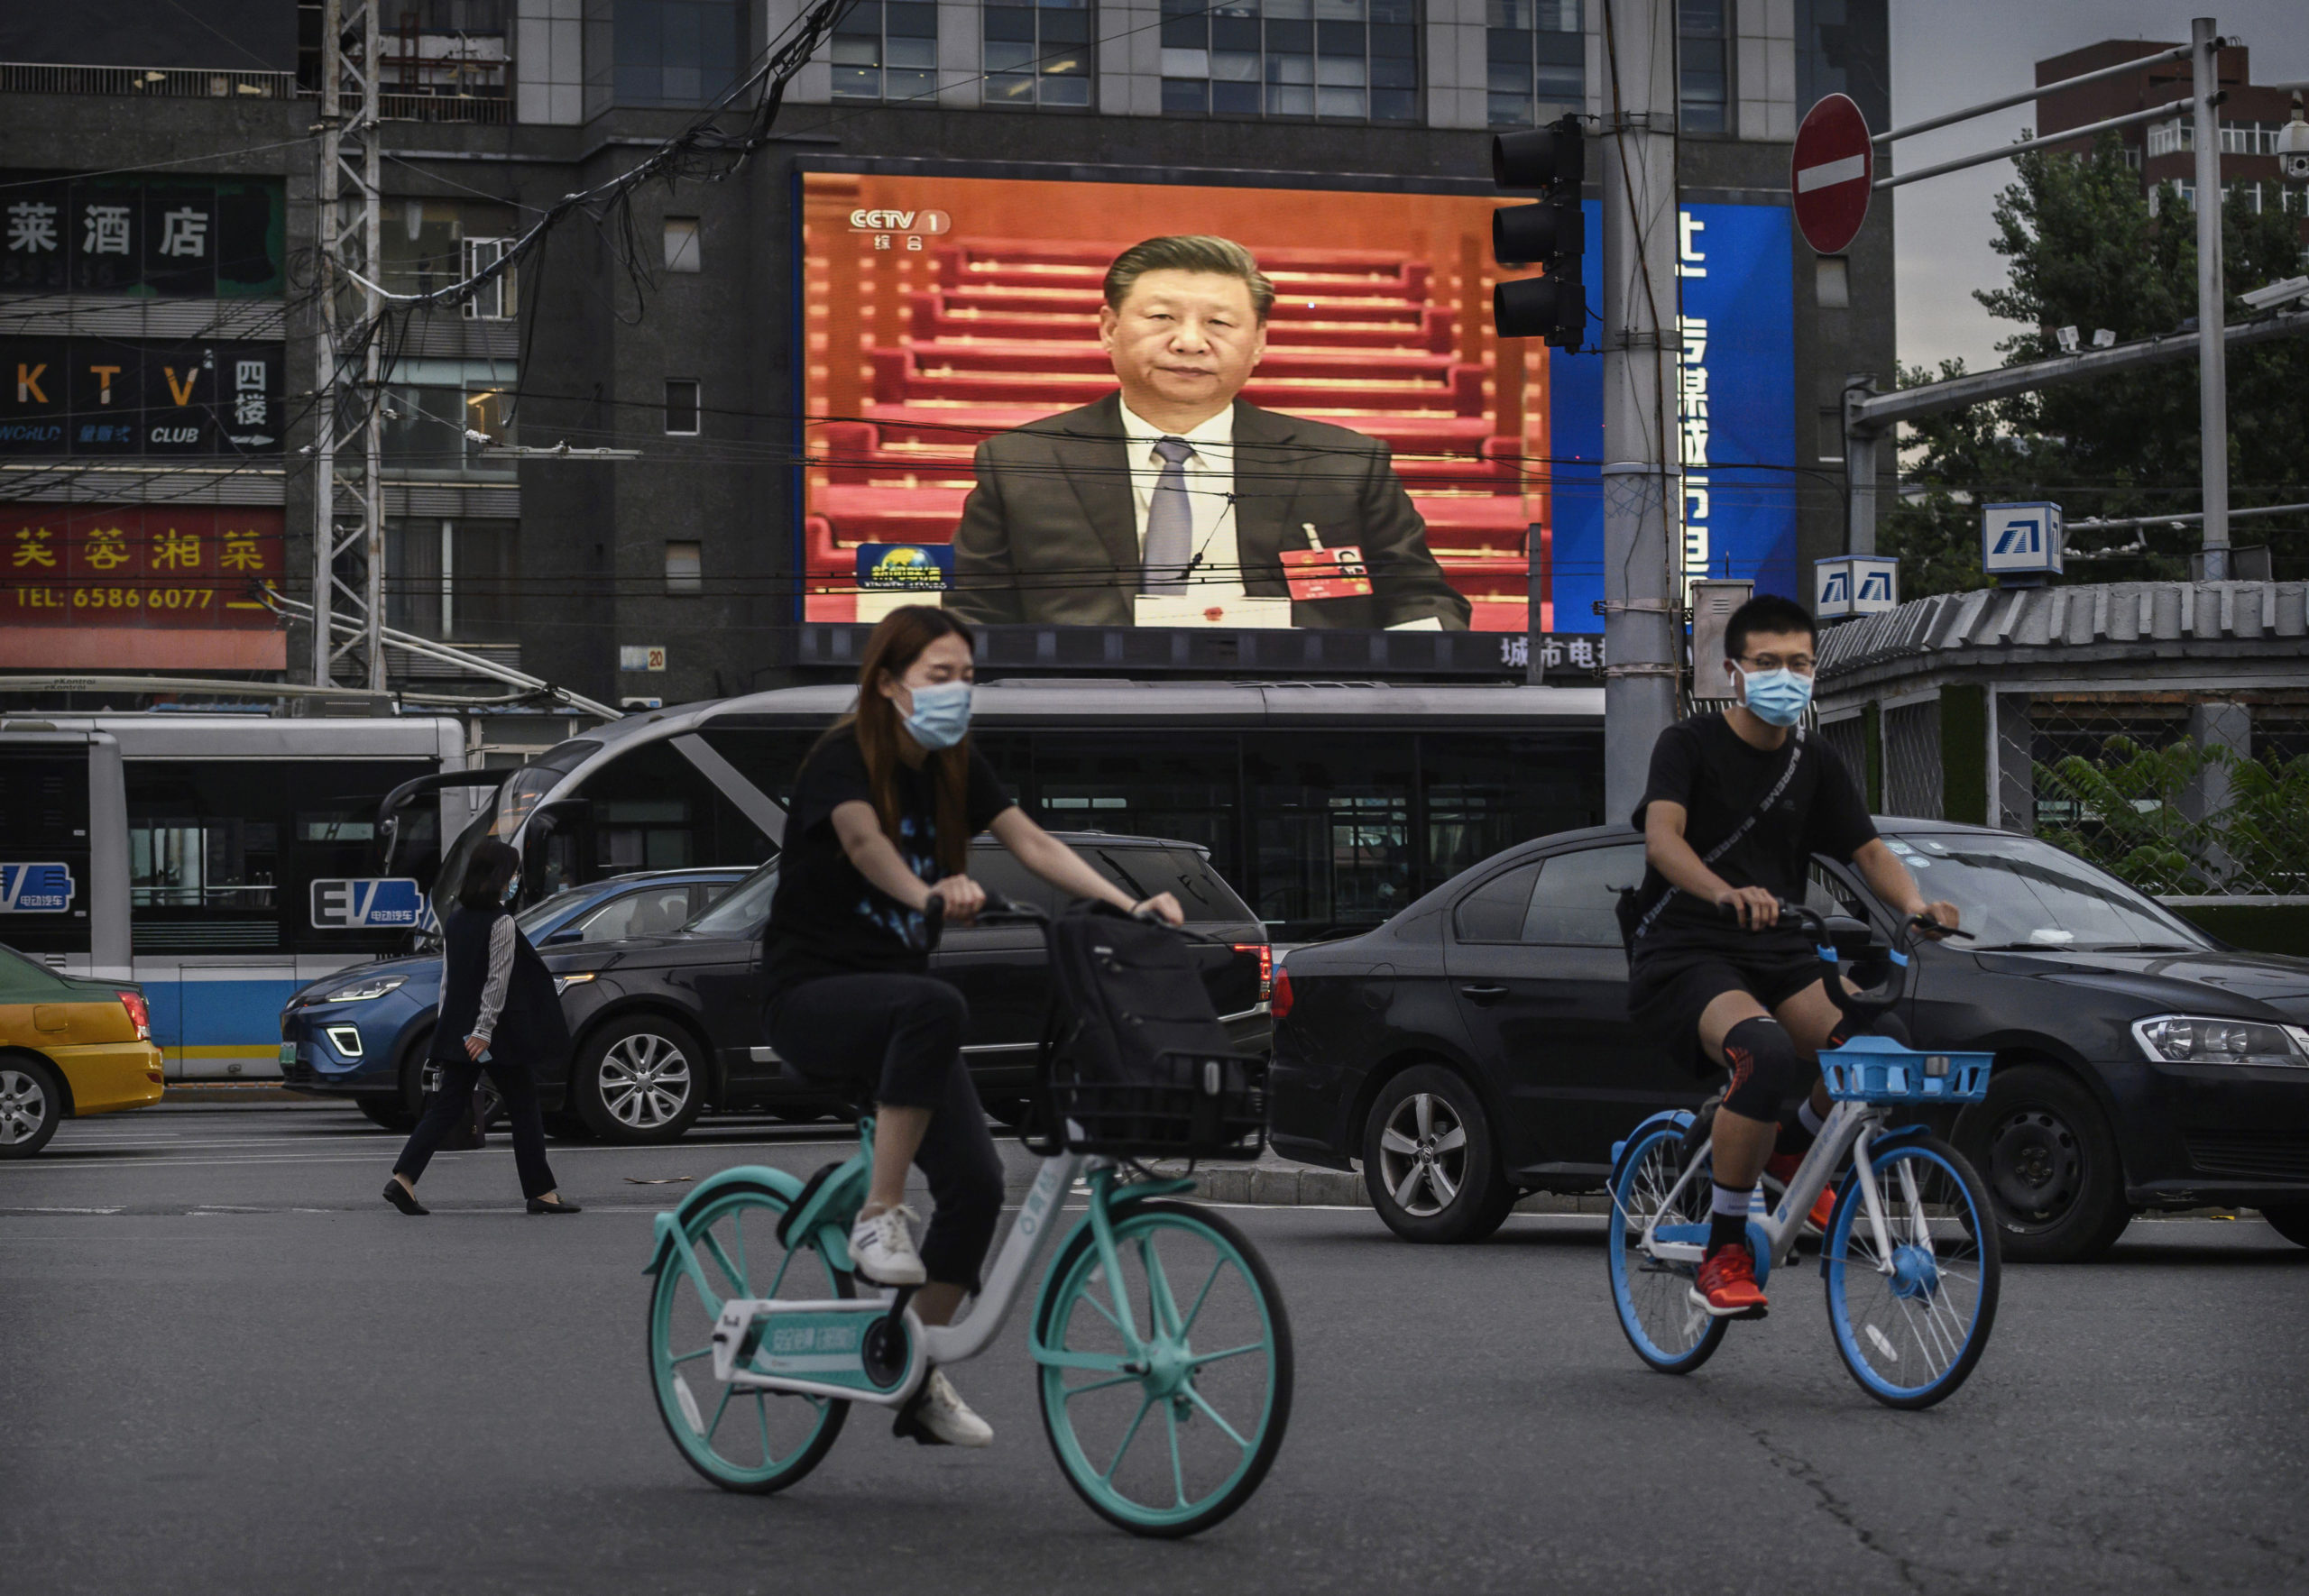 Chinese president Xi Jinping is seen on a large screen showing the evening news during a session of the National People's Congress at the Great Hall of the People on May 25, 2020 in Beijing, China. (Photo by Kevin Frayer/Getty Images)